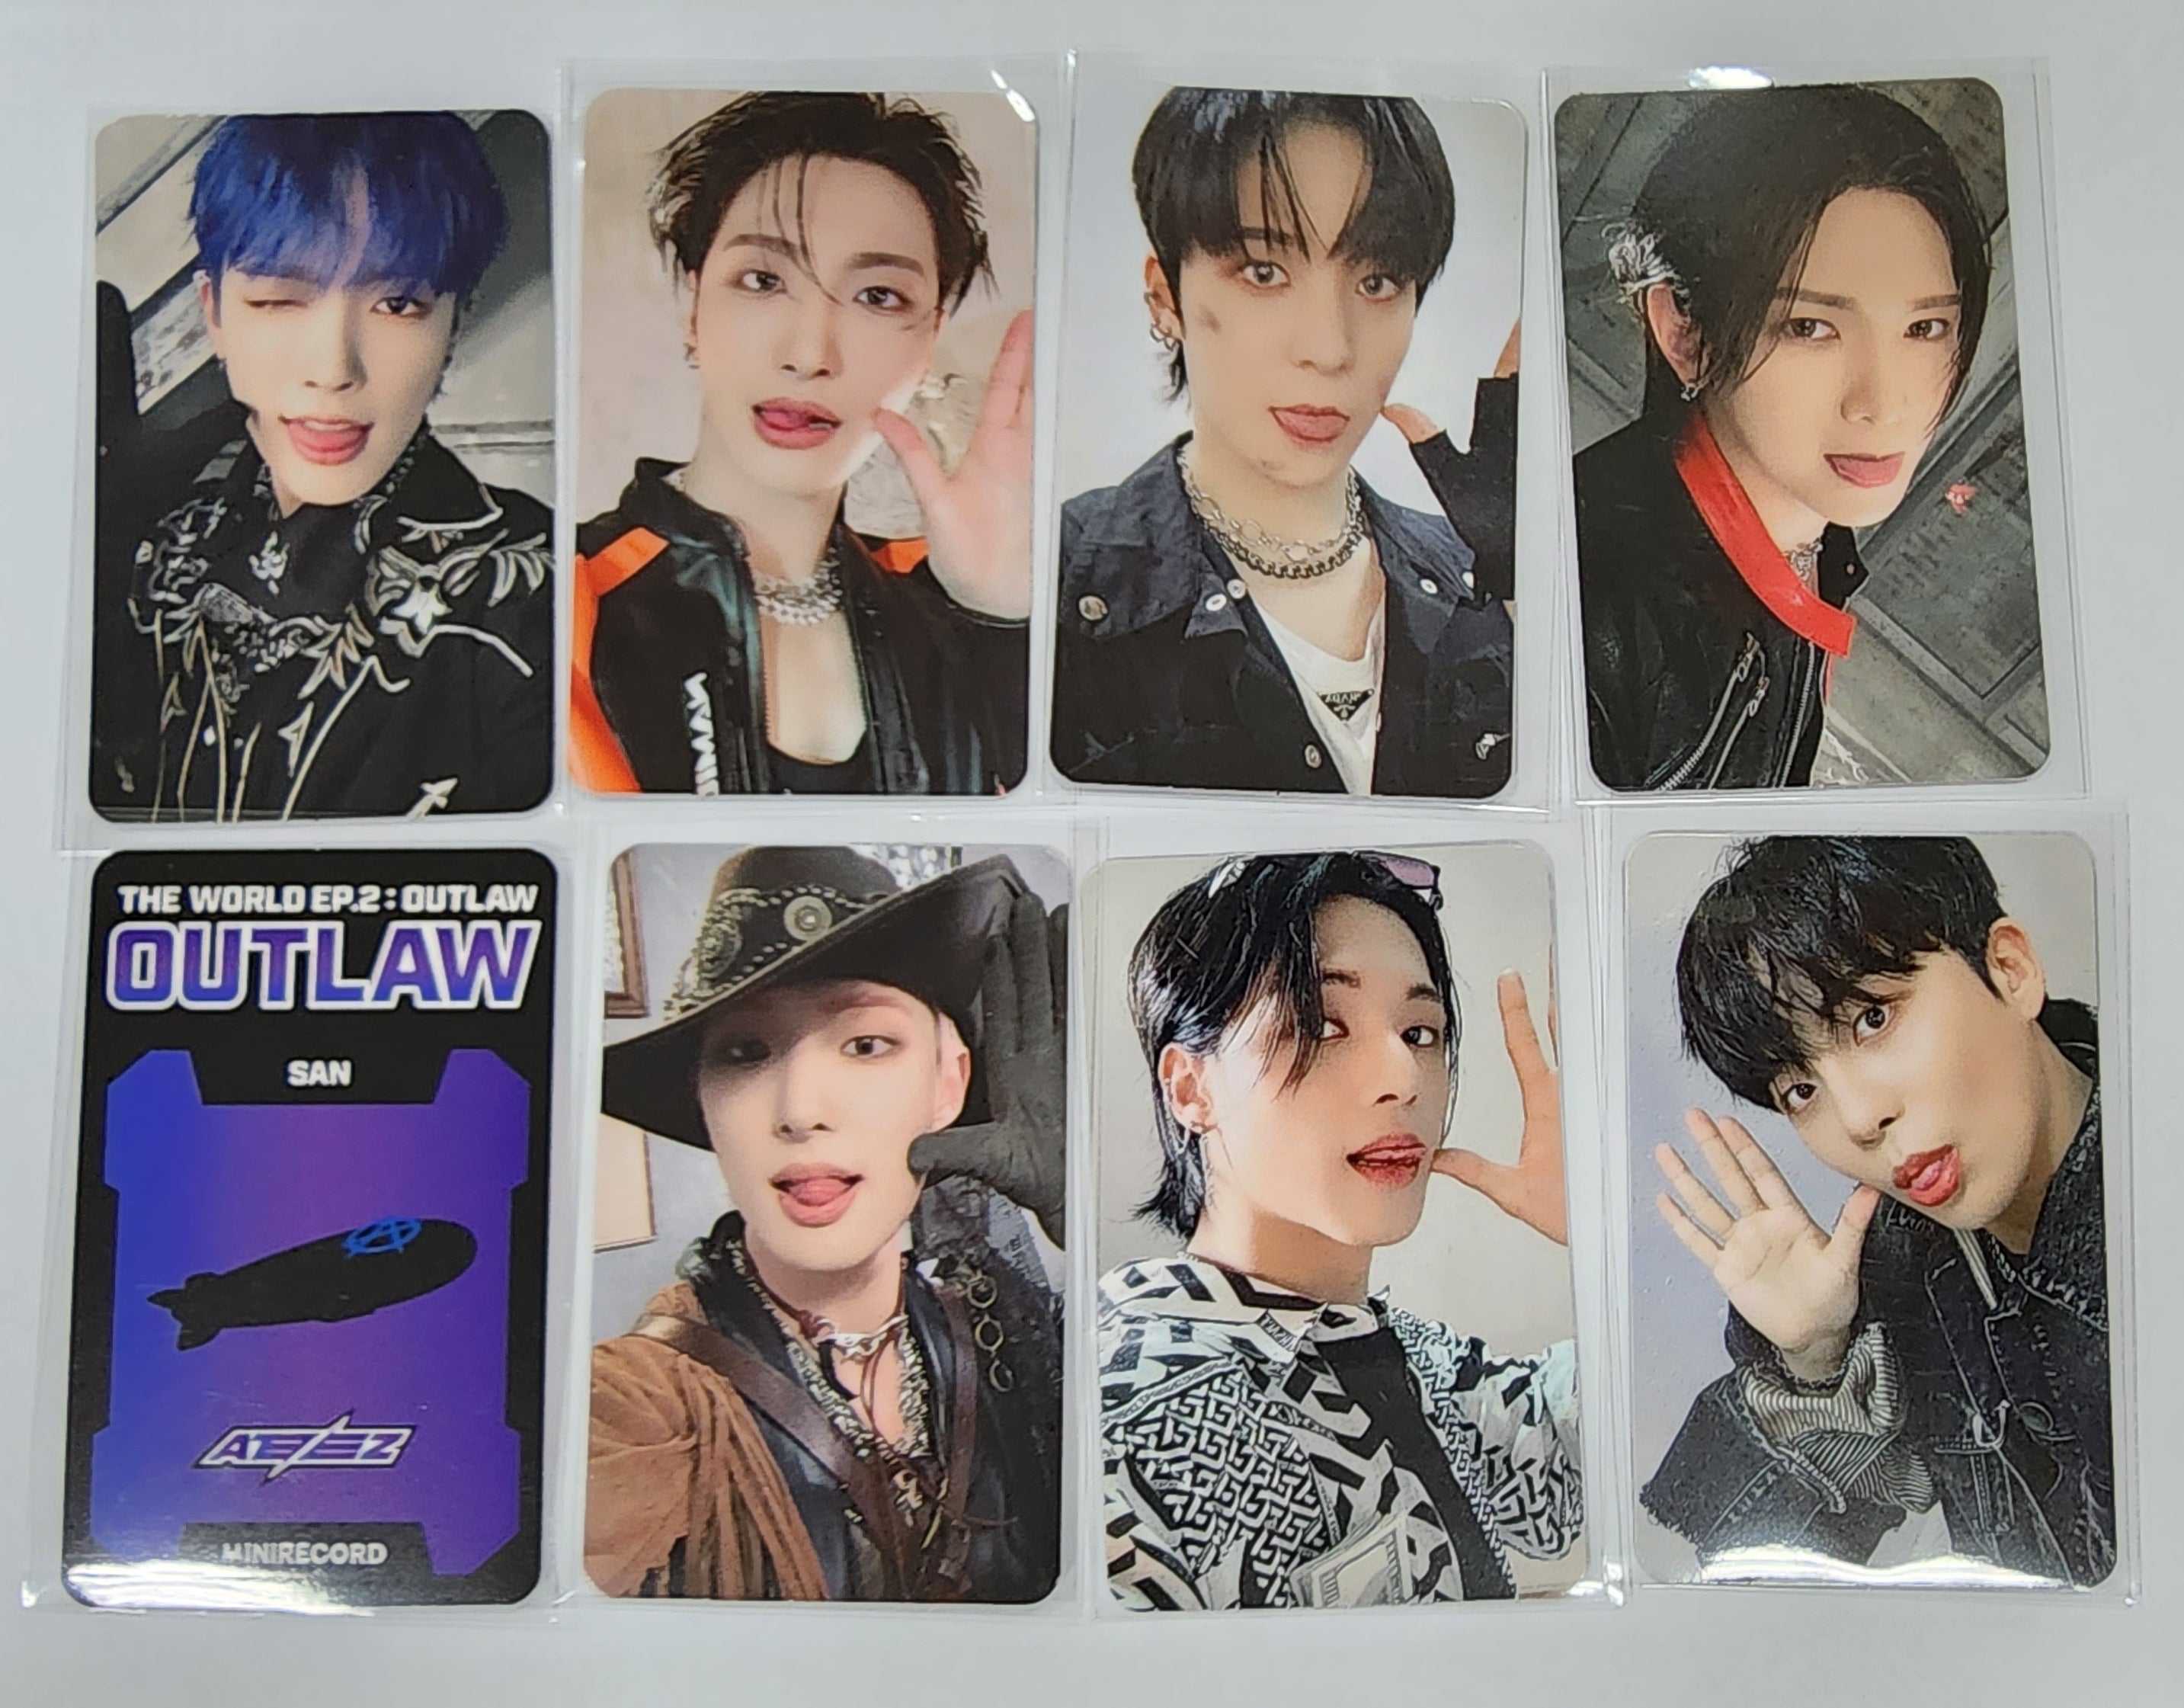 ateez OUTLAW – HALLYUSUPERSTORE